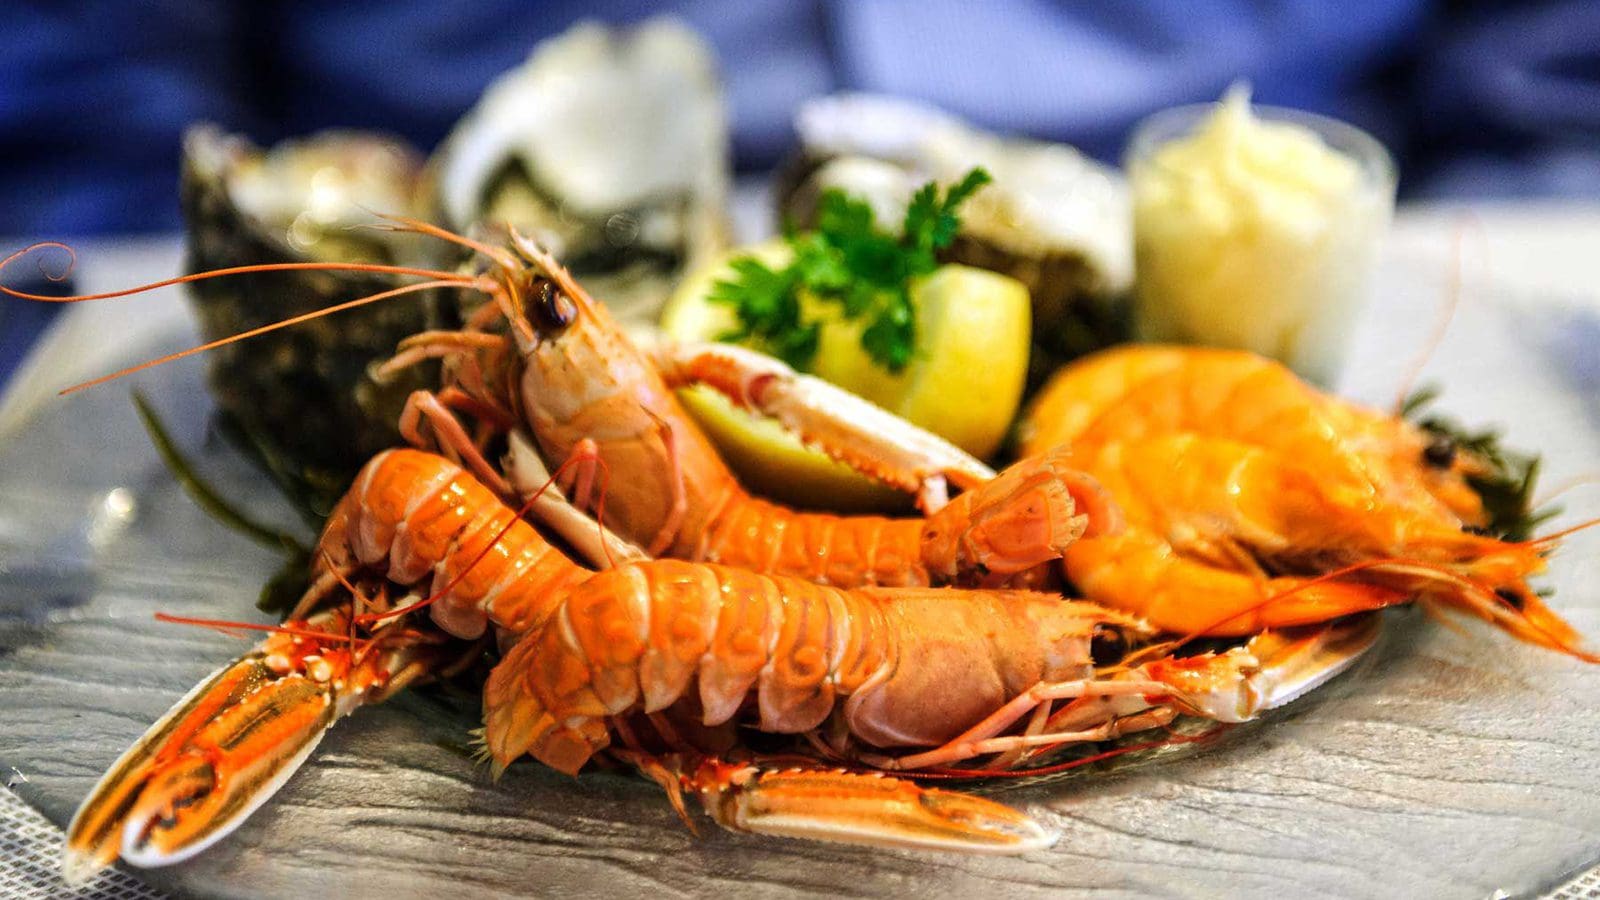 FDA updates seafood naming guidelines for clarity, compliance